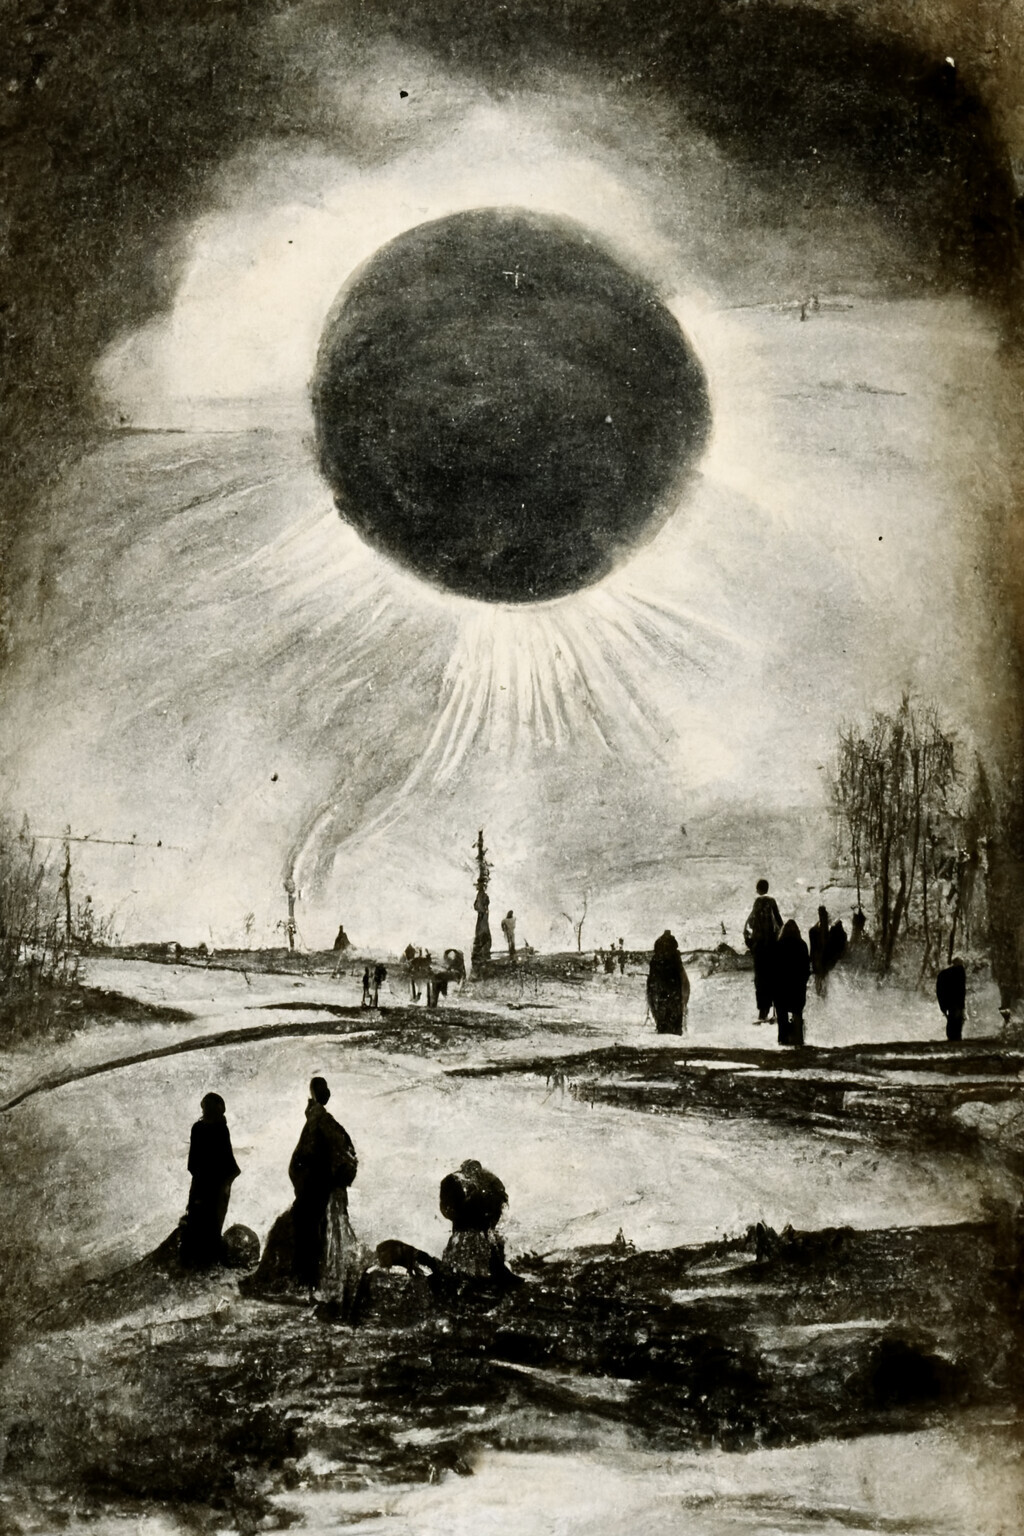 The Horror at Cer Mare
c. 1881
Charcoal on paper
'The sky was tore asunder and from it poured revelation.'